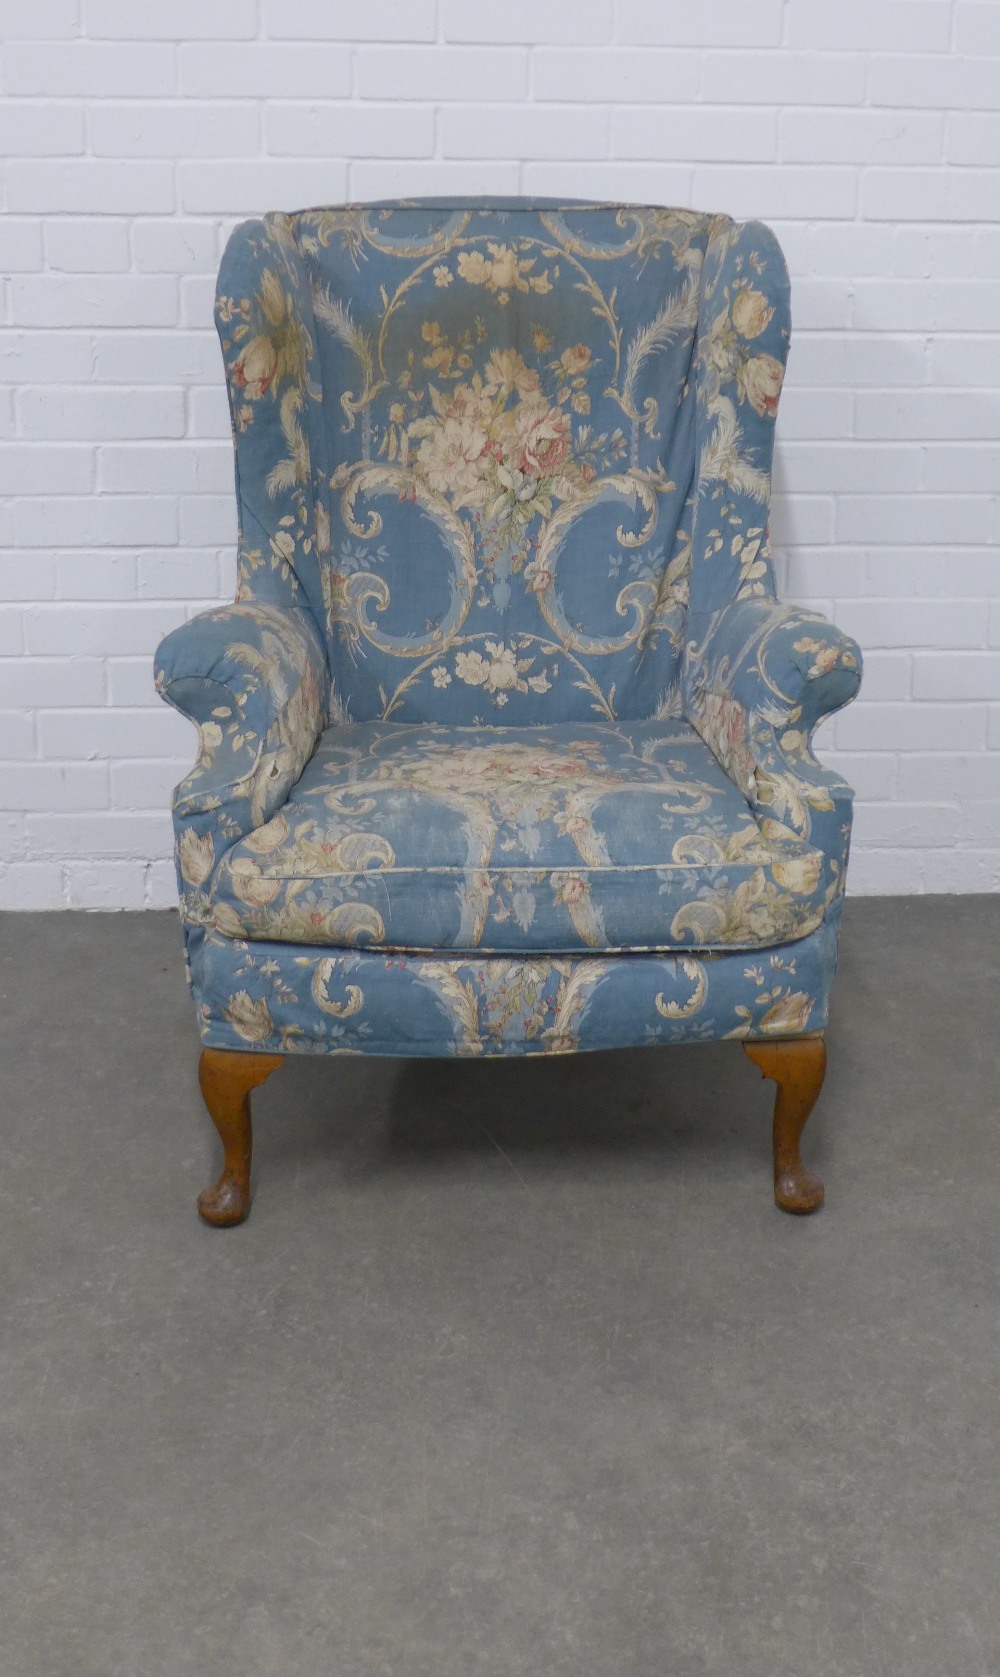 Wingback armchair with country house floral upholstery / covers, 78 x 102 x 52cm. - Image 2 of 3